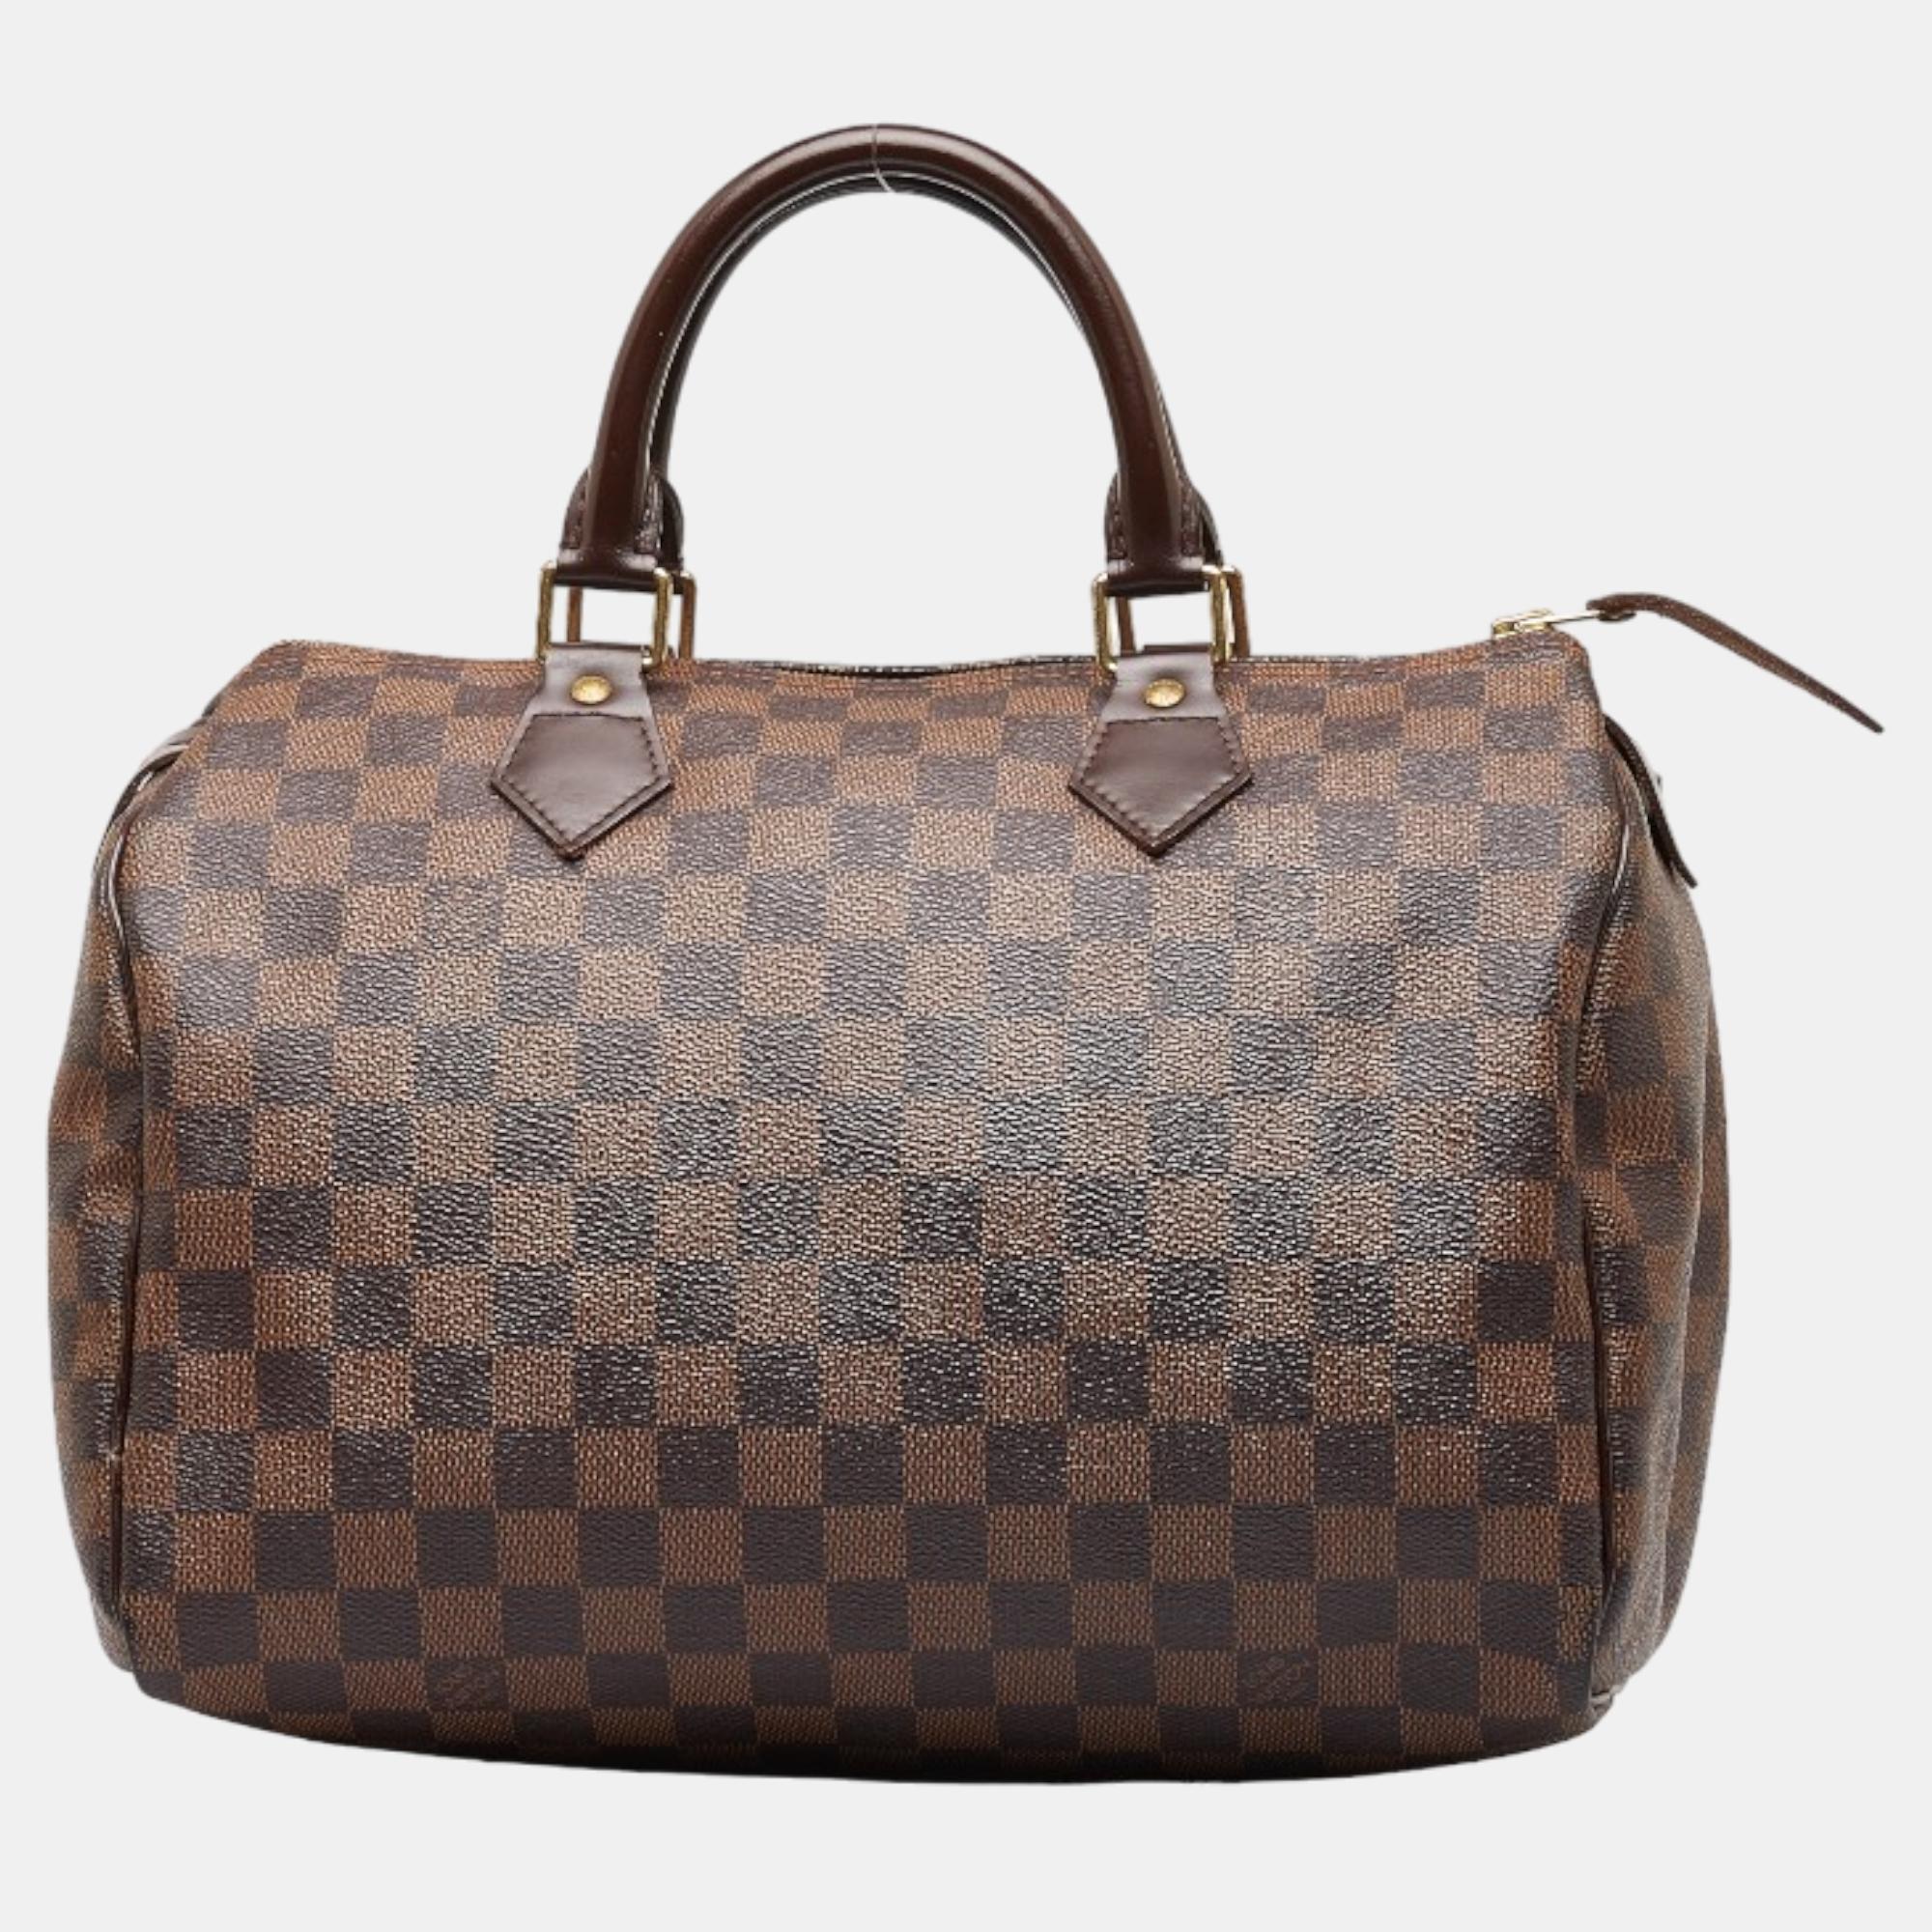 Carry this lovely Louis Vuitton bag as a stylish accompaniment to your ensemble. Made from high quality materials it has a luxe look and durable quality.